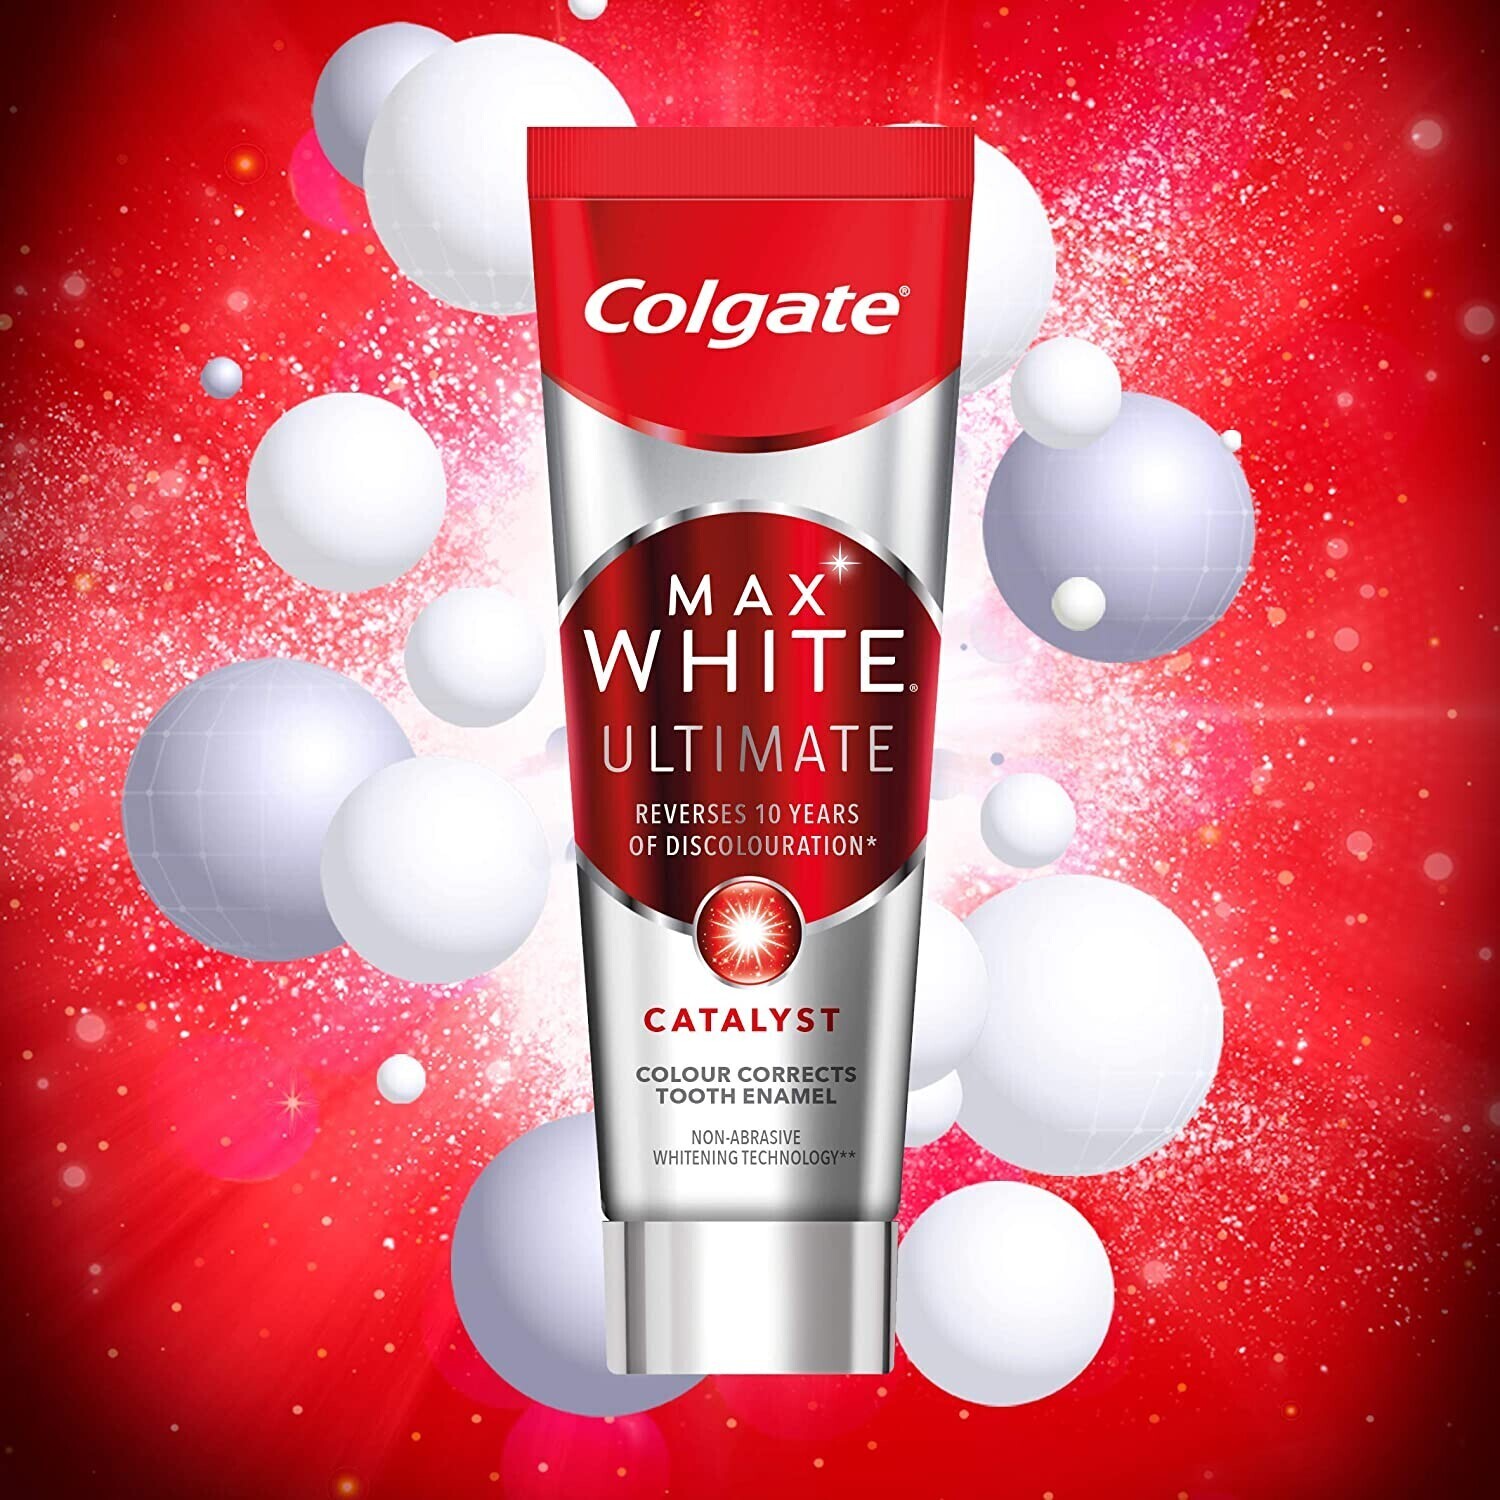 Colgate Max White Ultimate Radiance Toothpaste, At Home Whitening